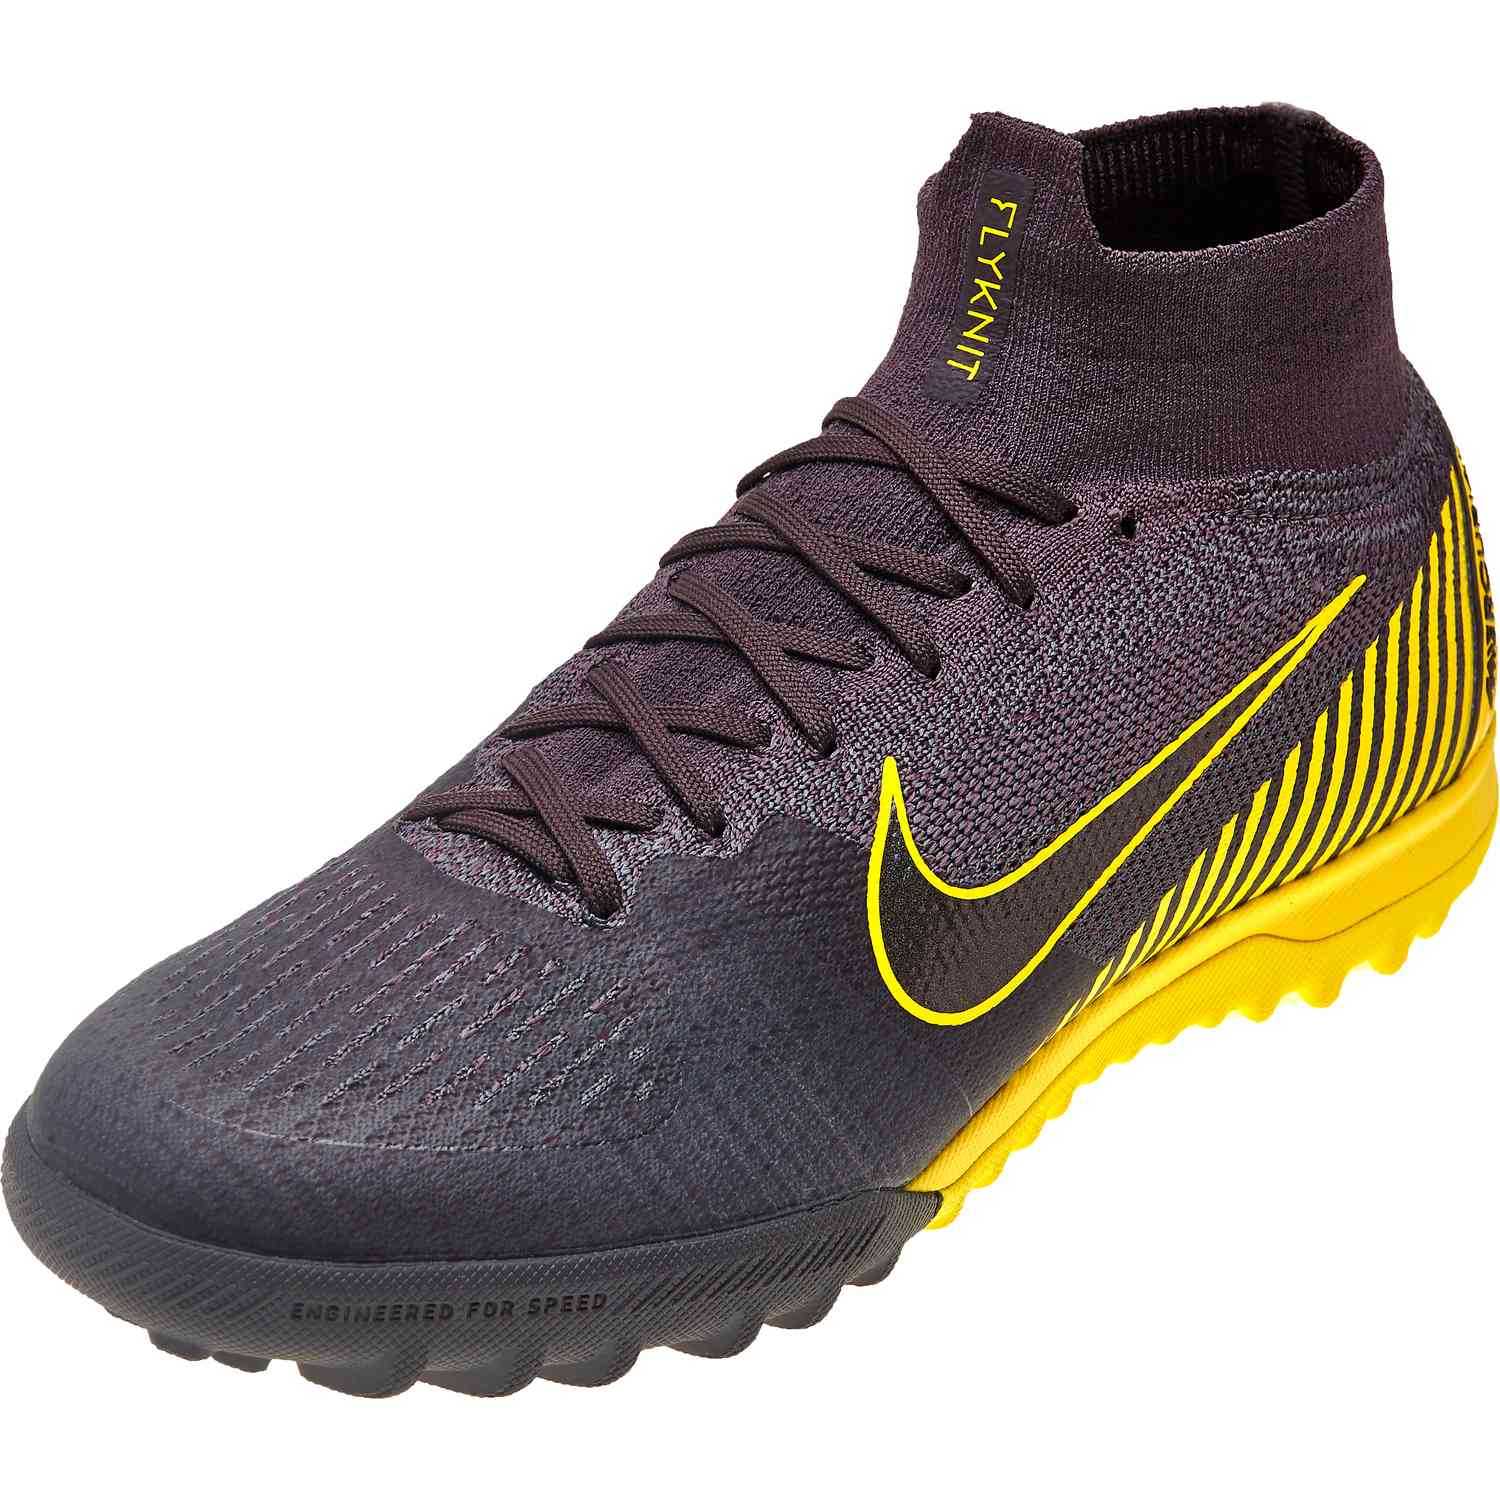 sopa Inaccesible personaje Nike Mercurial Superfly 6 Elite TF - Anthracite - Soccer Master